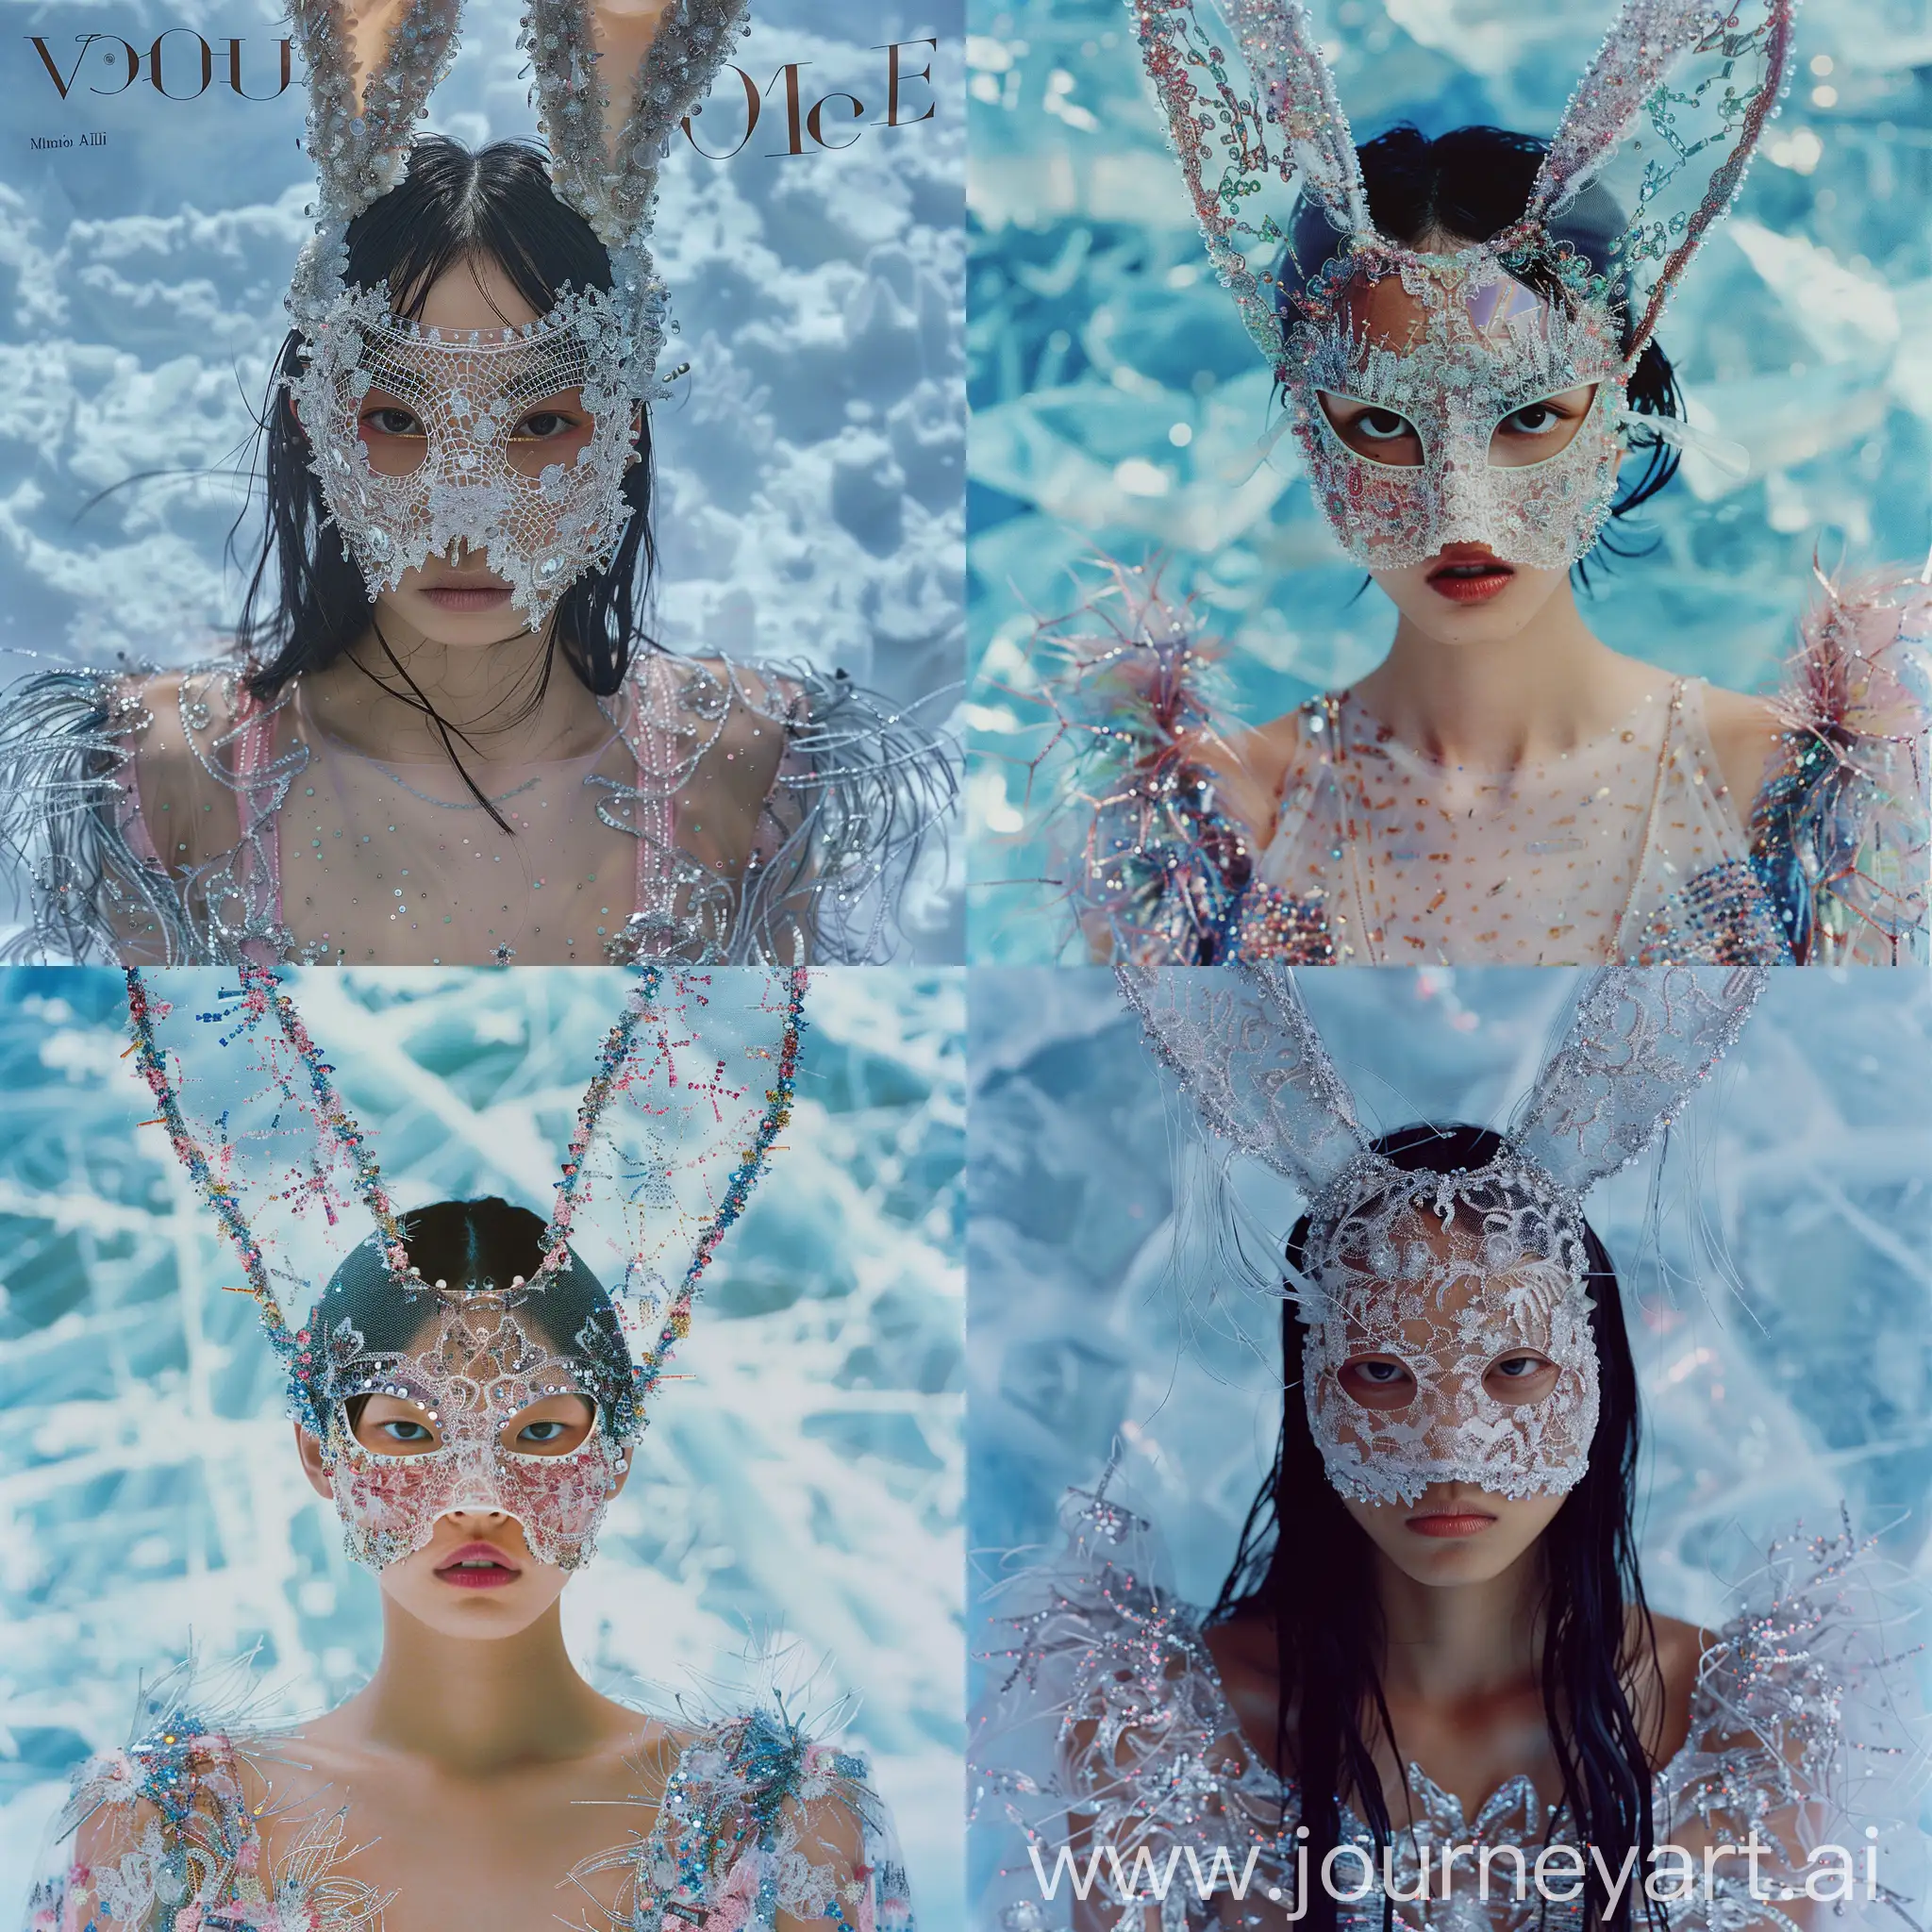 Vogue-Cover-90s-Japanese-Model-in-Lace-Mask-with-CrystalAdorned-Top-on-Ice-Background